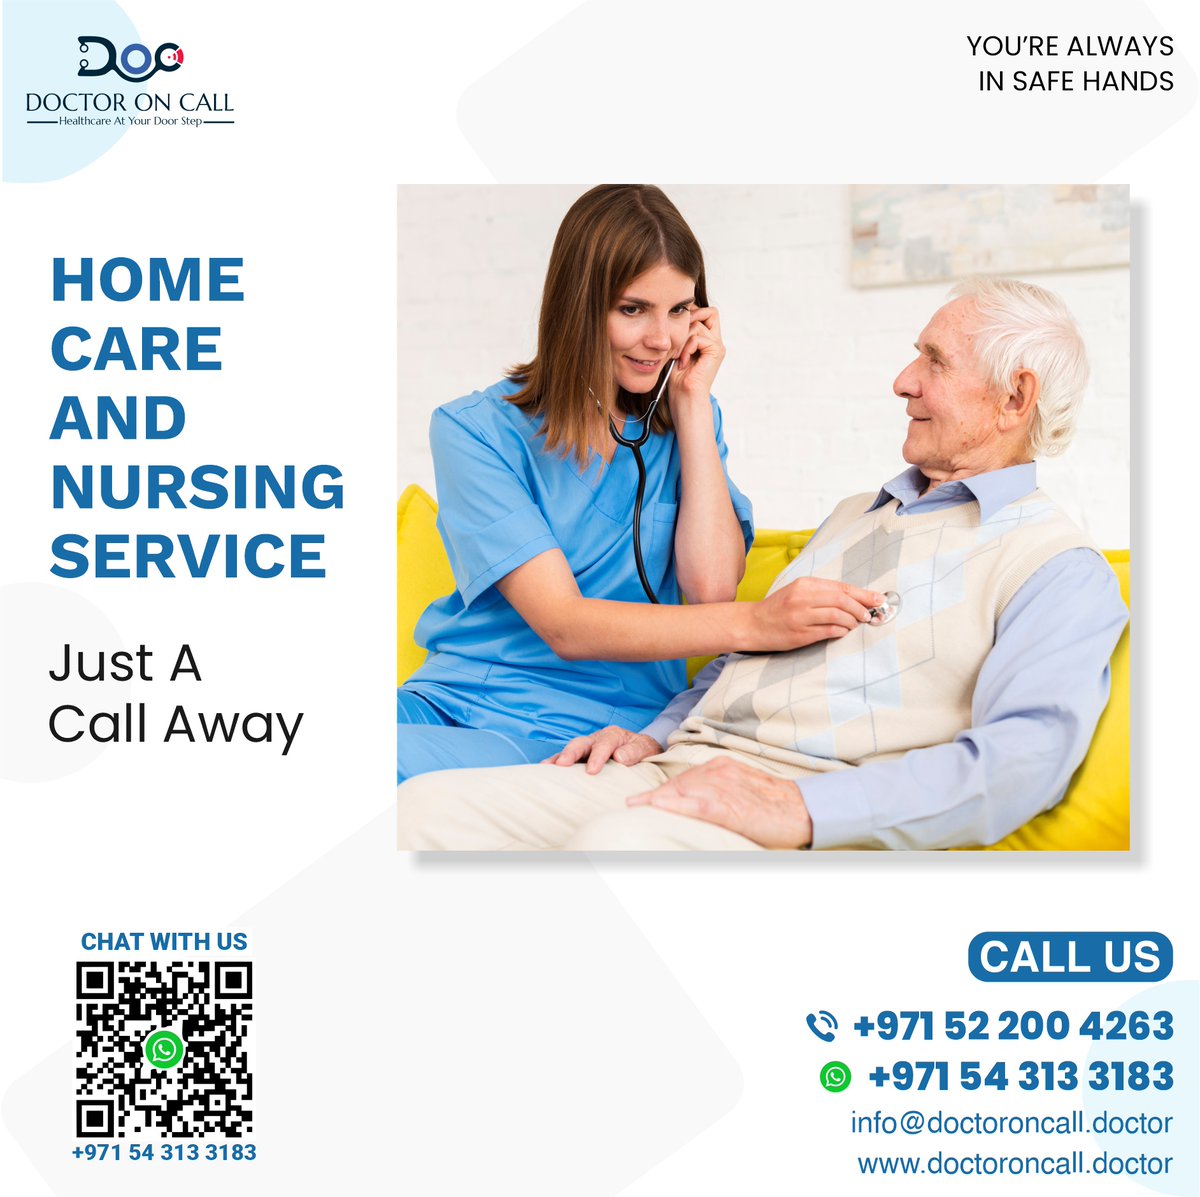 Home Care and Nursing Service
Just A Call Away
For Appointment 📞Call: +971543133183 | +971522004263
.
#doctoroncall #bloodtest #doctorconsultation #doctor #physiotherapyathome #healthcare #health #NursingCare #homenursing #homenurse #dubai #labtestathome #Influenzatest #PCRtest